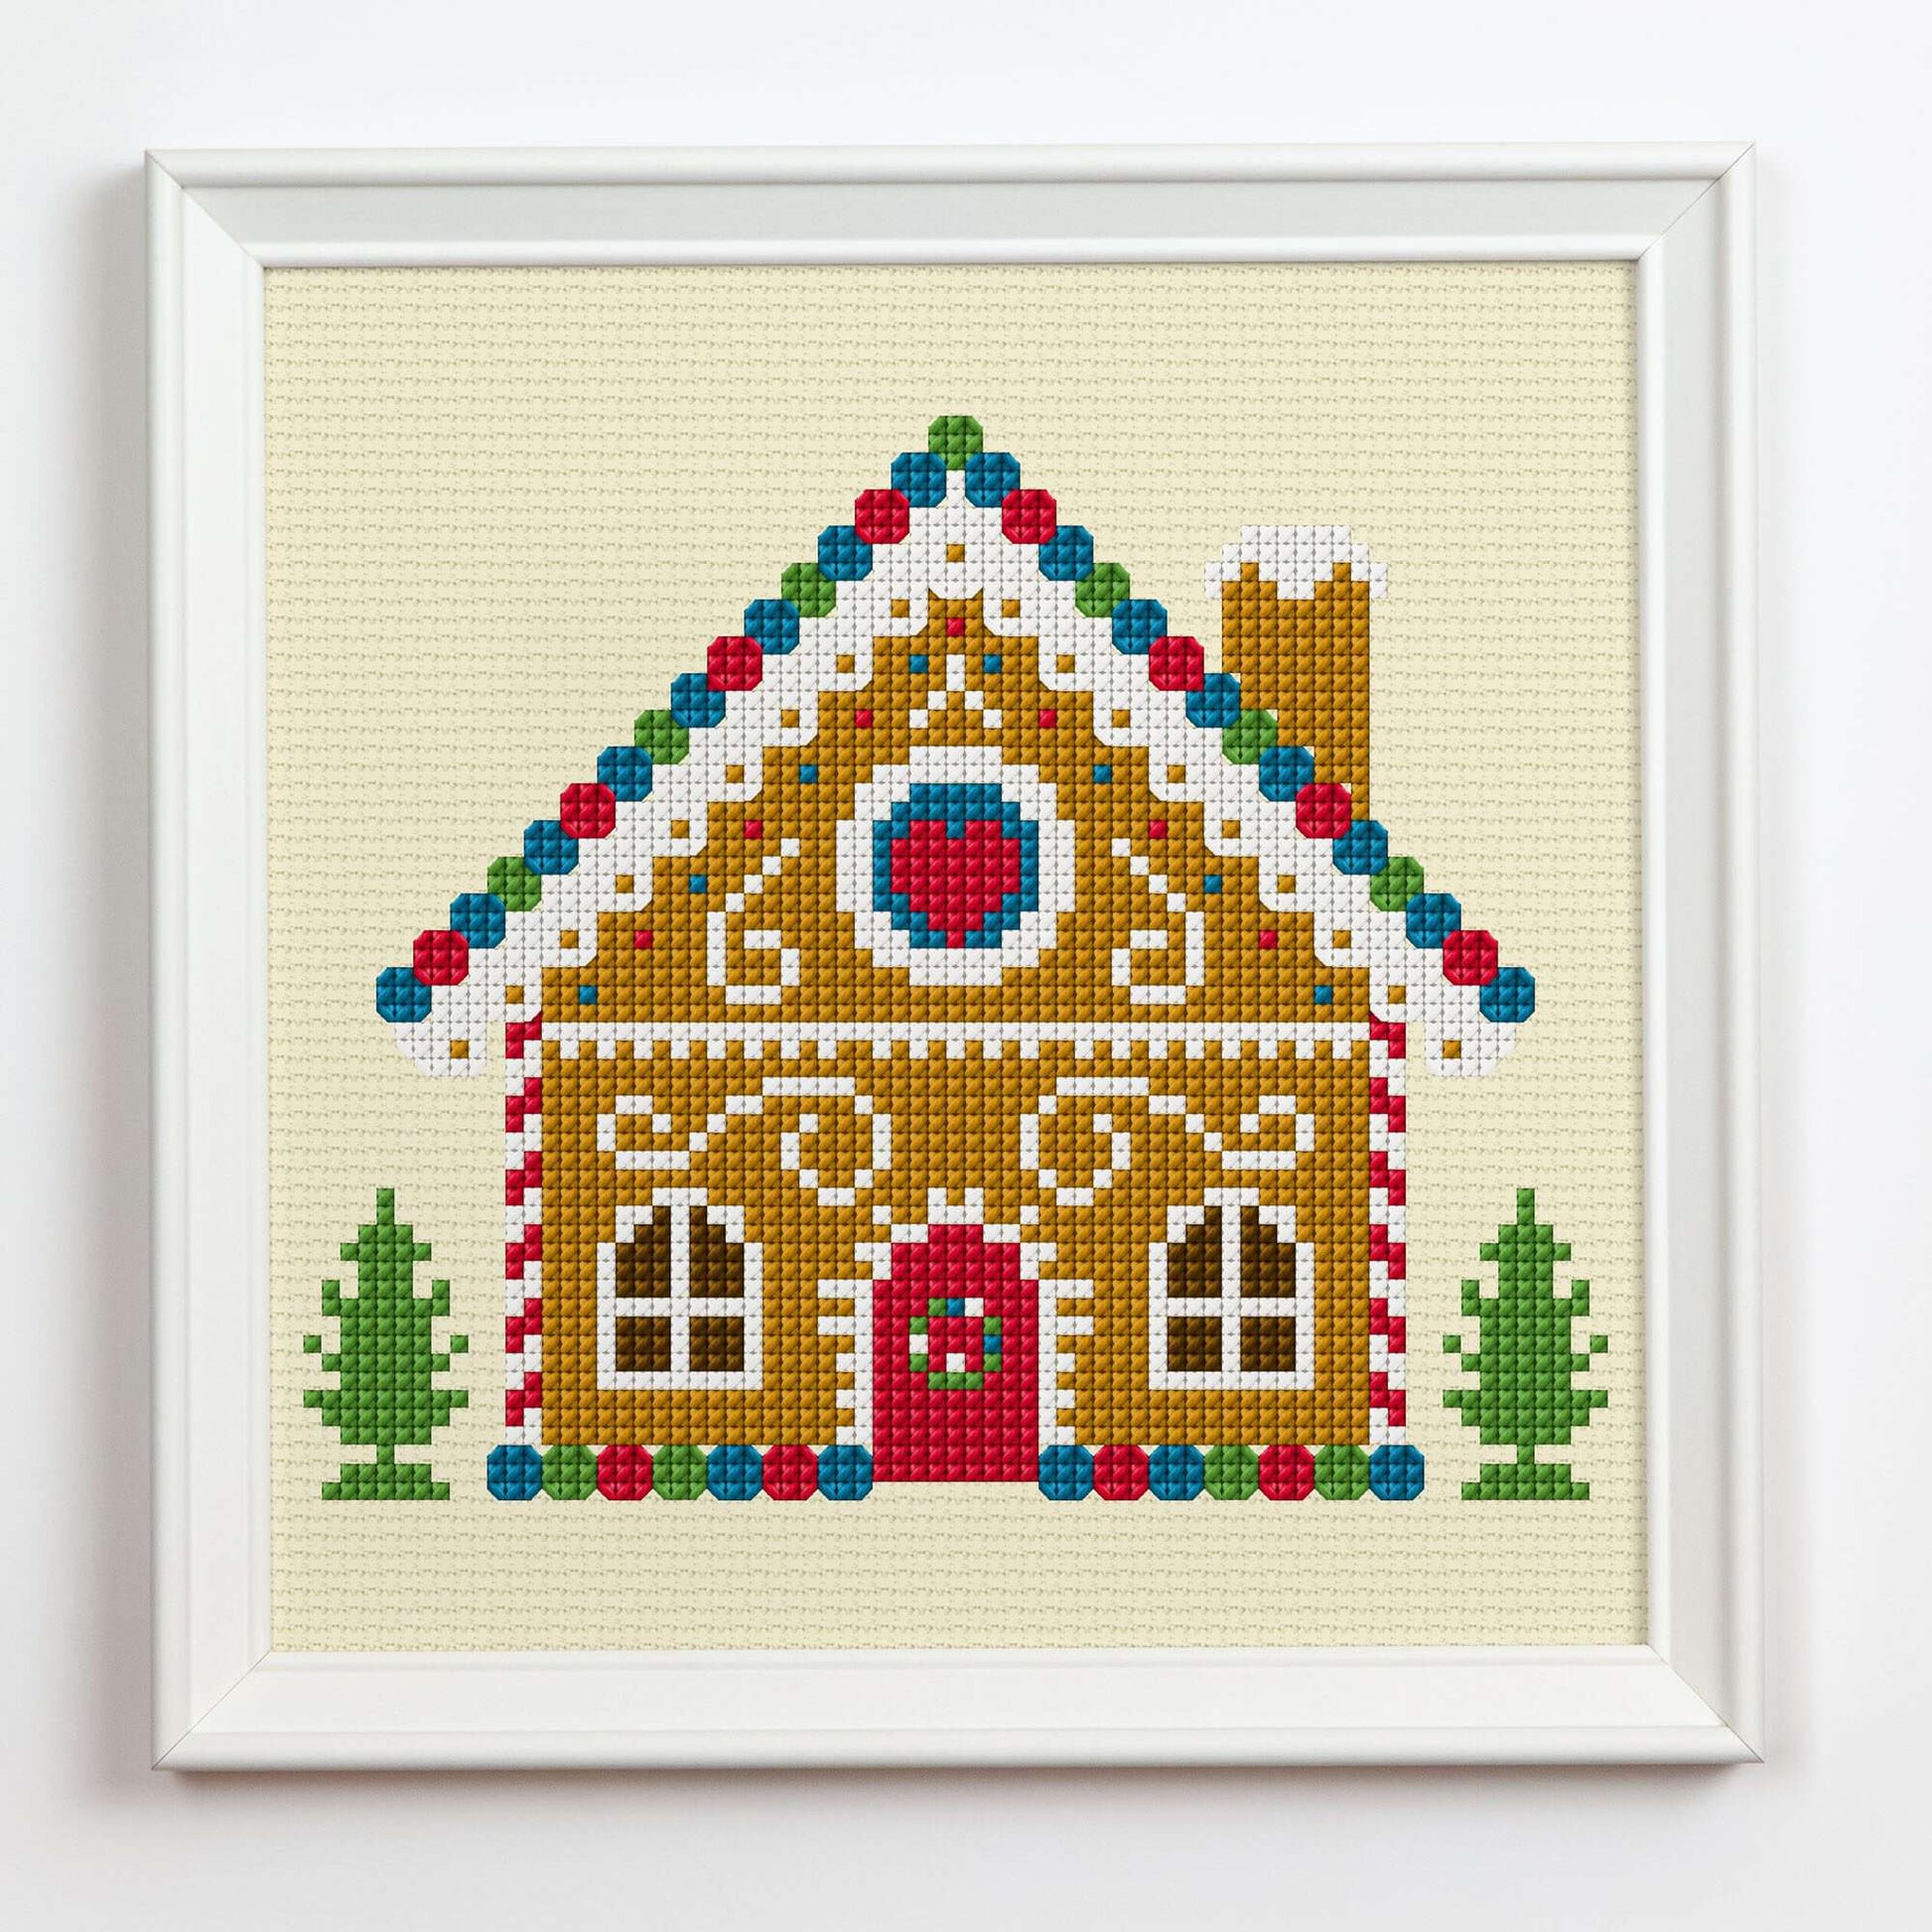 Anchor Gingerbread House Cross Stitch Embroidery Design made in Anchor Embroidery Floss Spools yarn